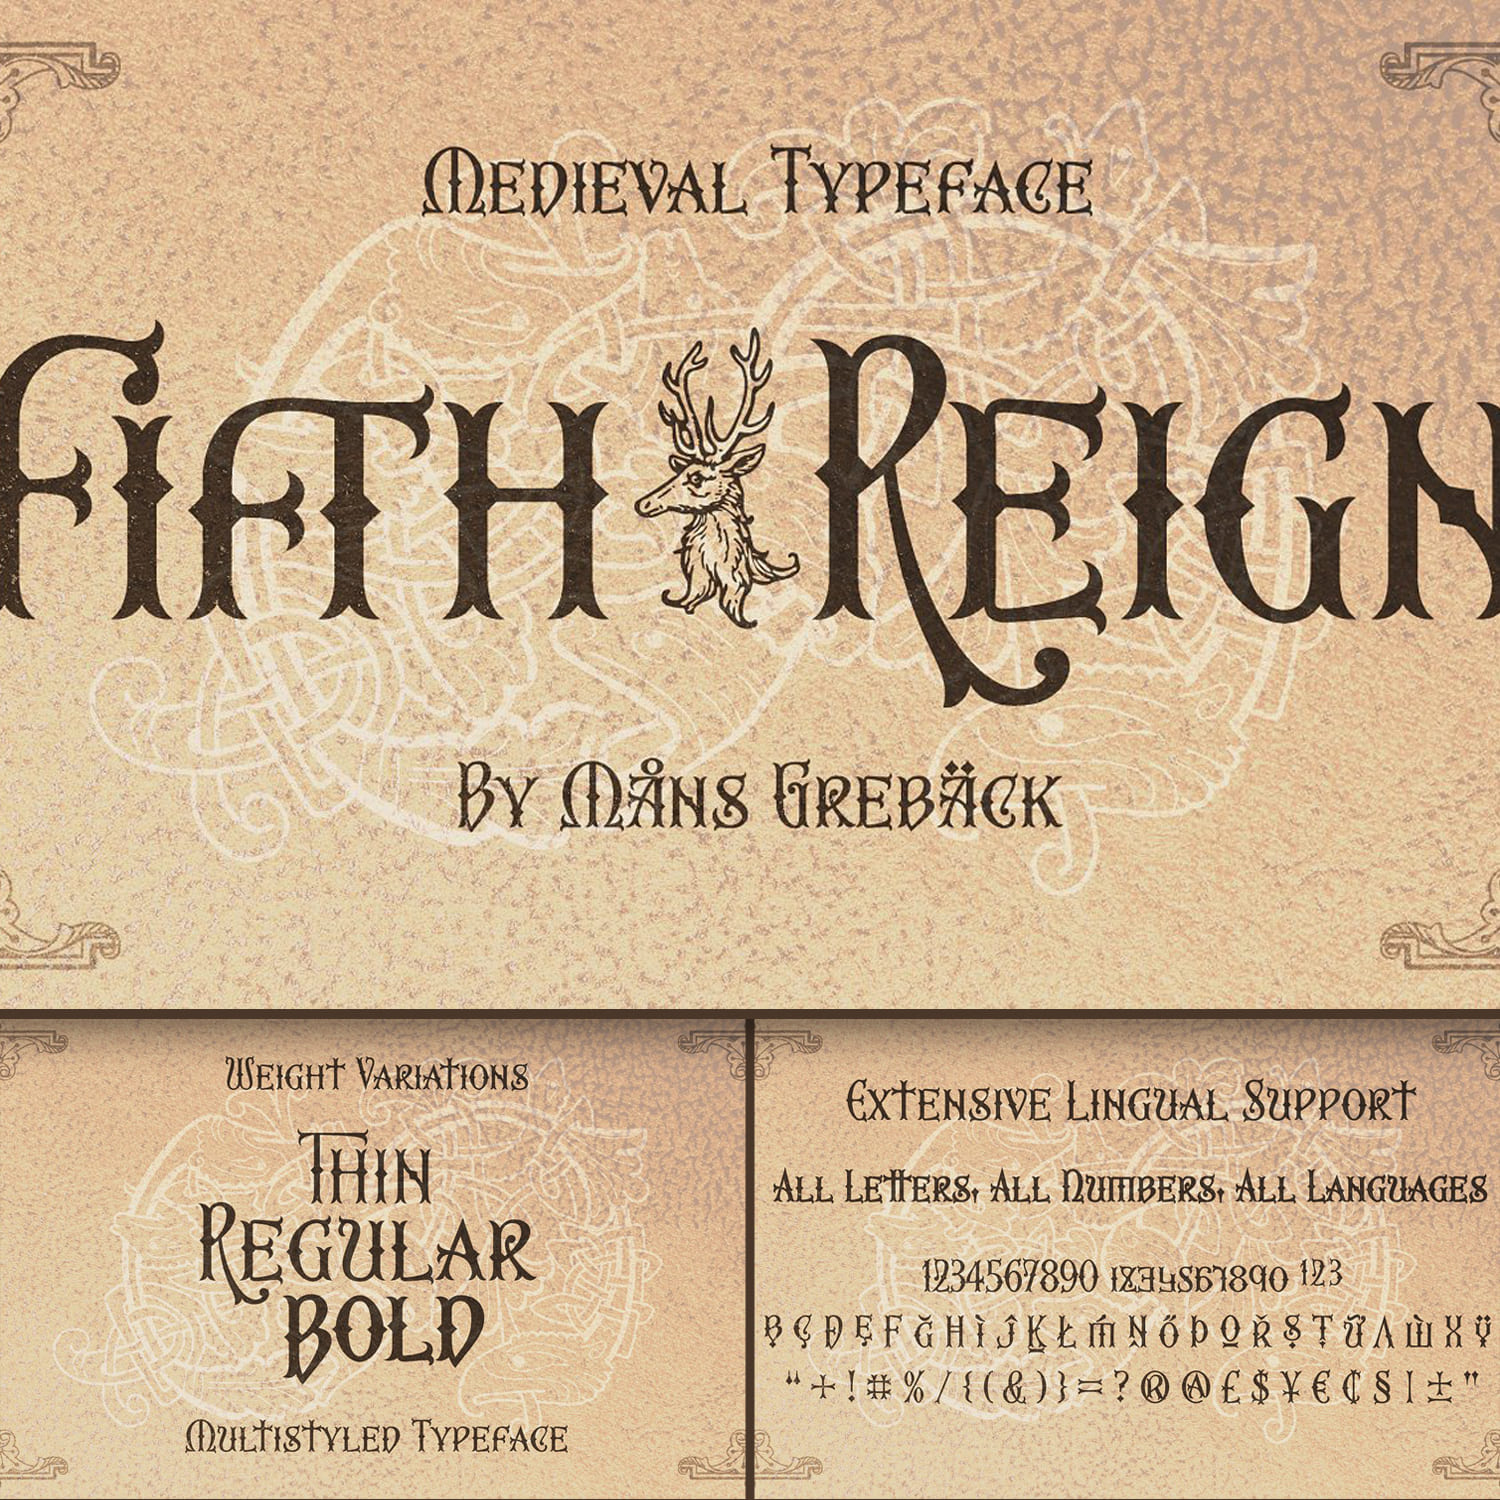 Fifth Reign – Decorative Typeface! cover.